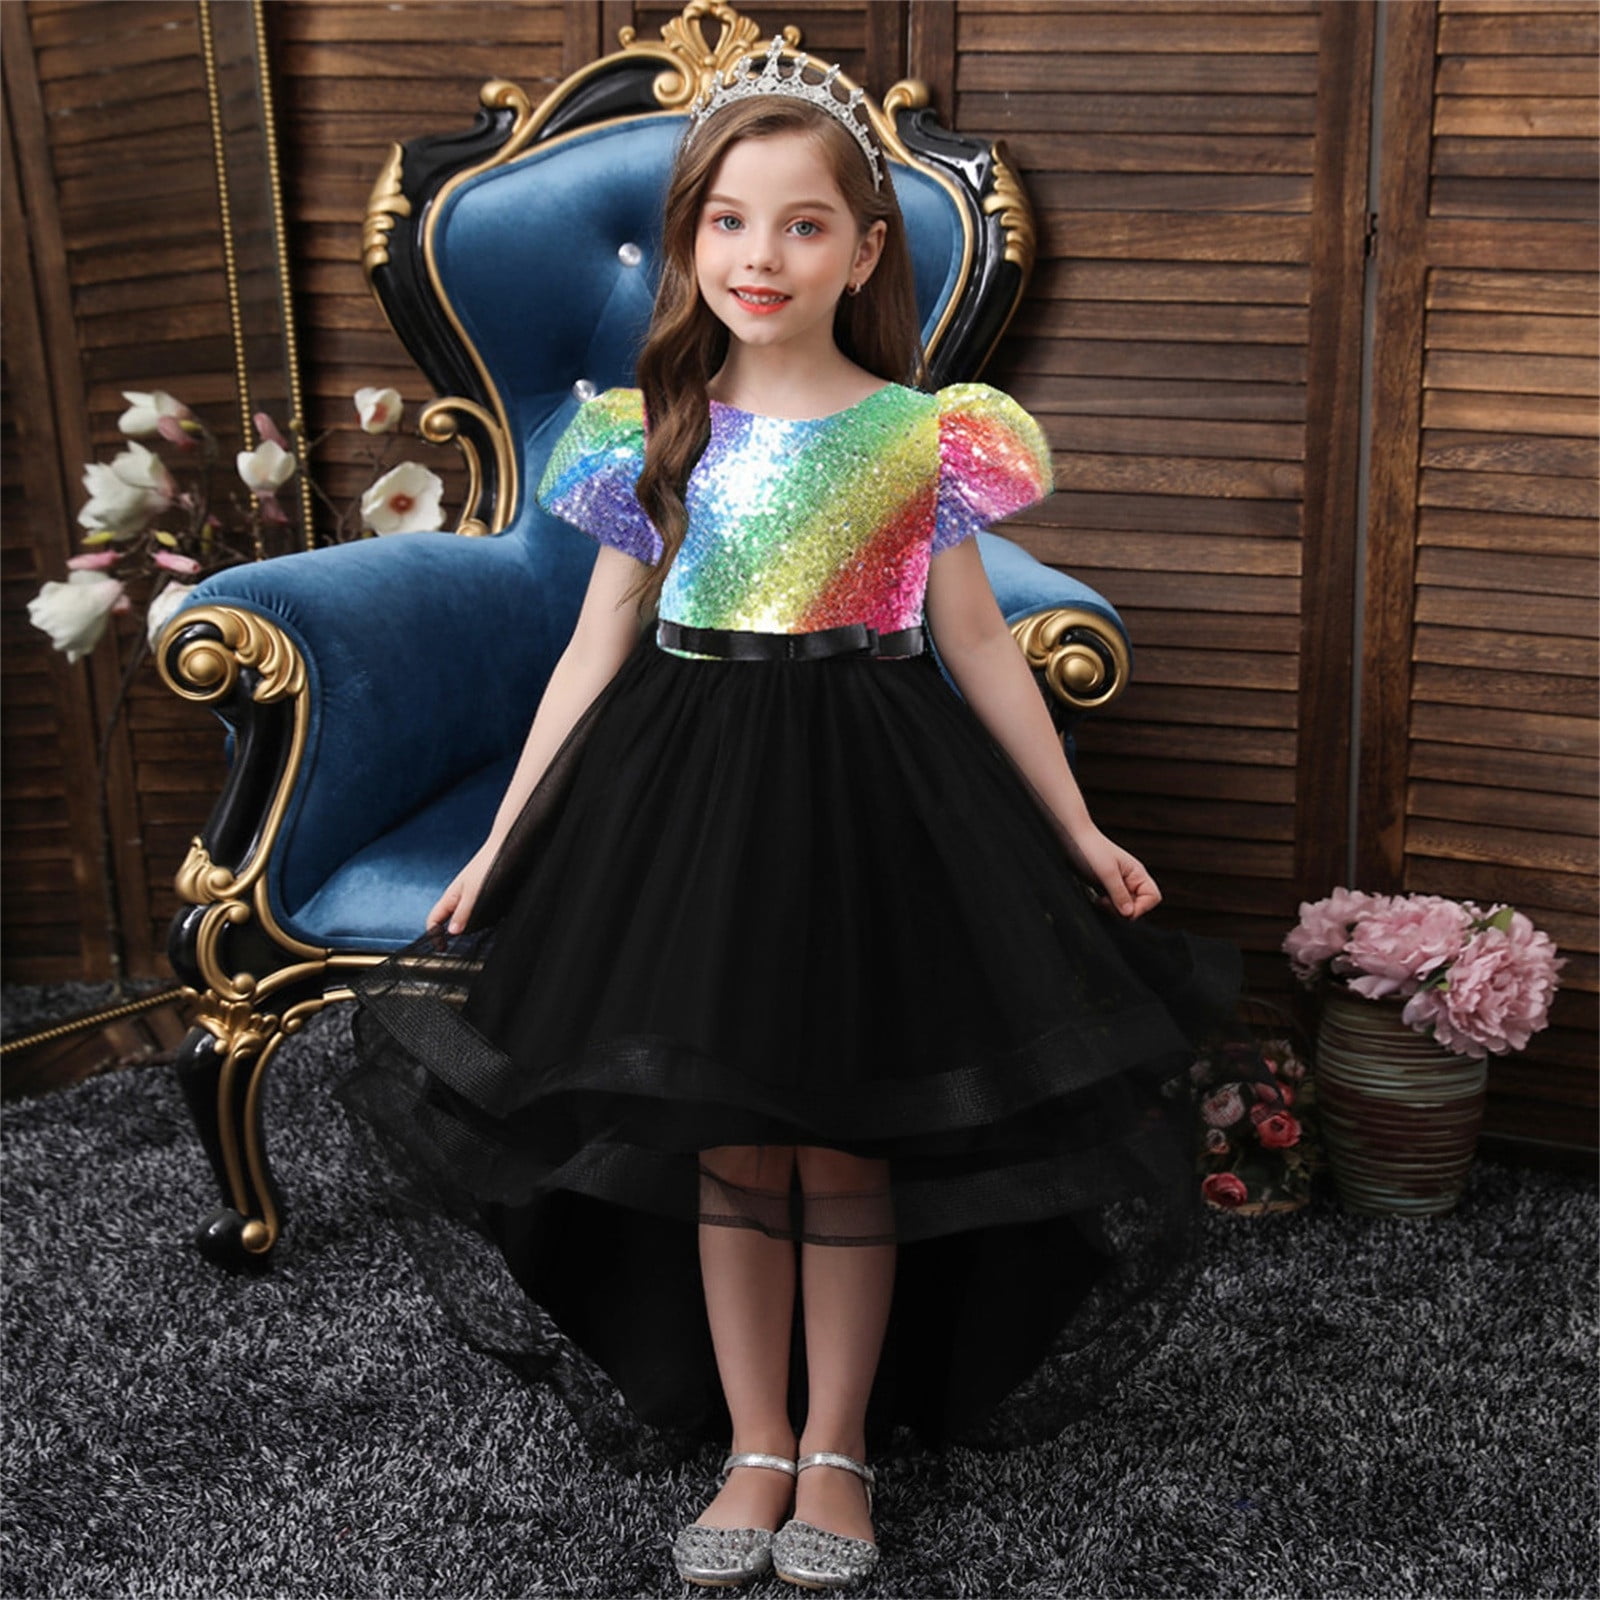 Princess Dark Red Velvet Ball Gown Flower Girl Dress With Short Puffy  Sleeves Perfect For Weddings, Birthdays, And Special Occasions At An  Affordable Price From Weddingpalacedress, $83.43 | DHgate.Com